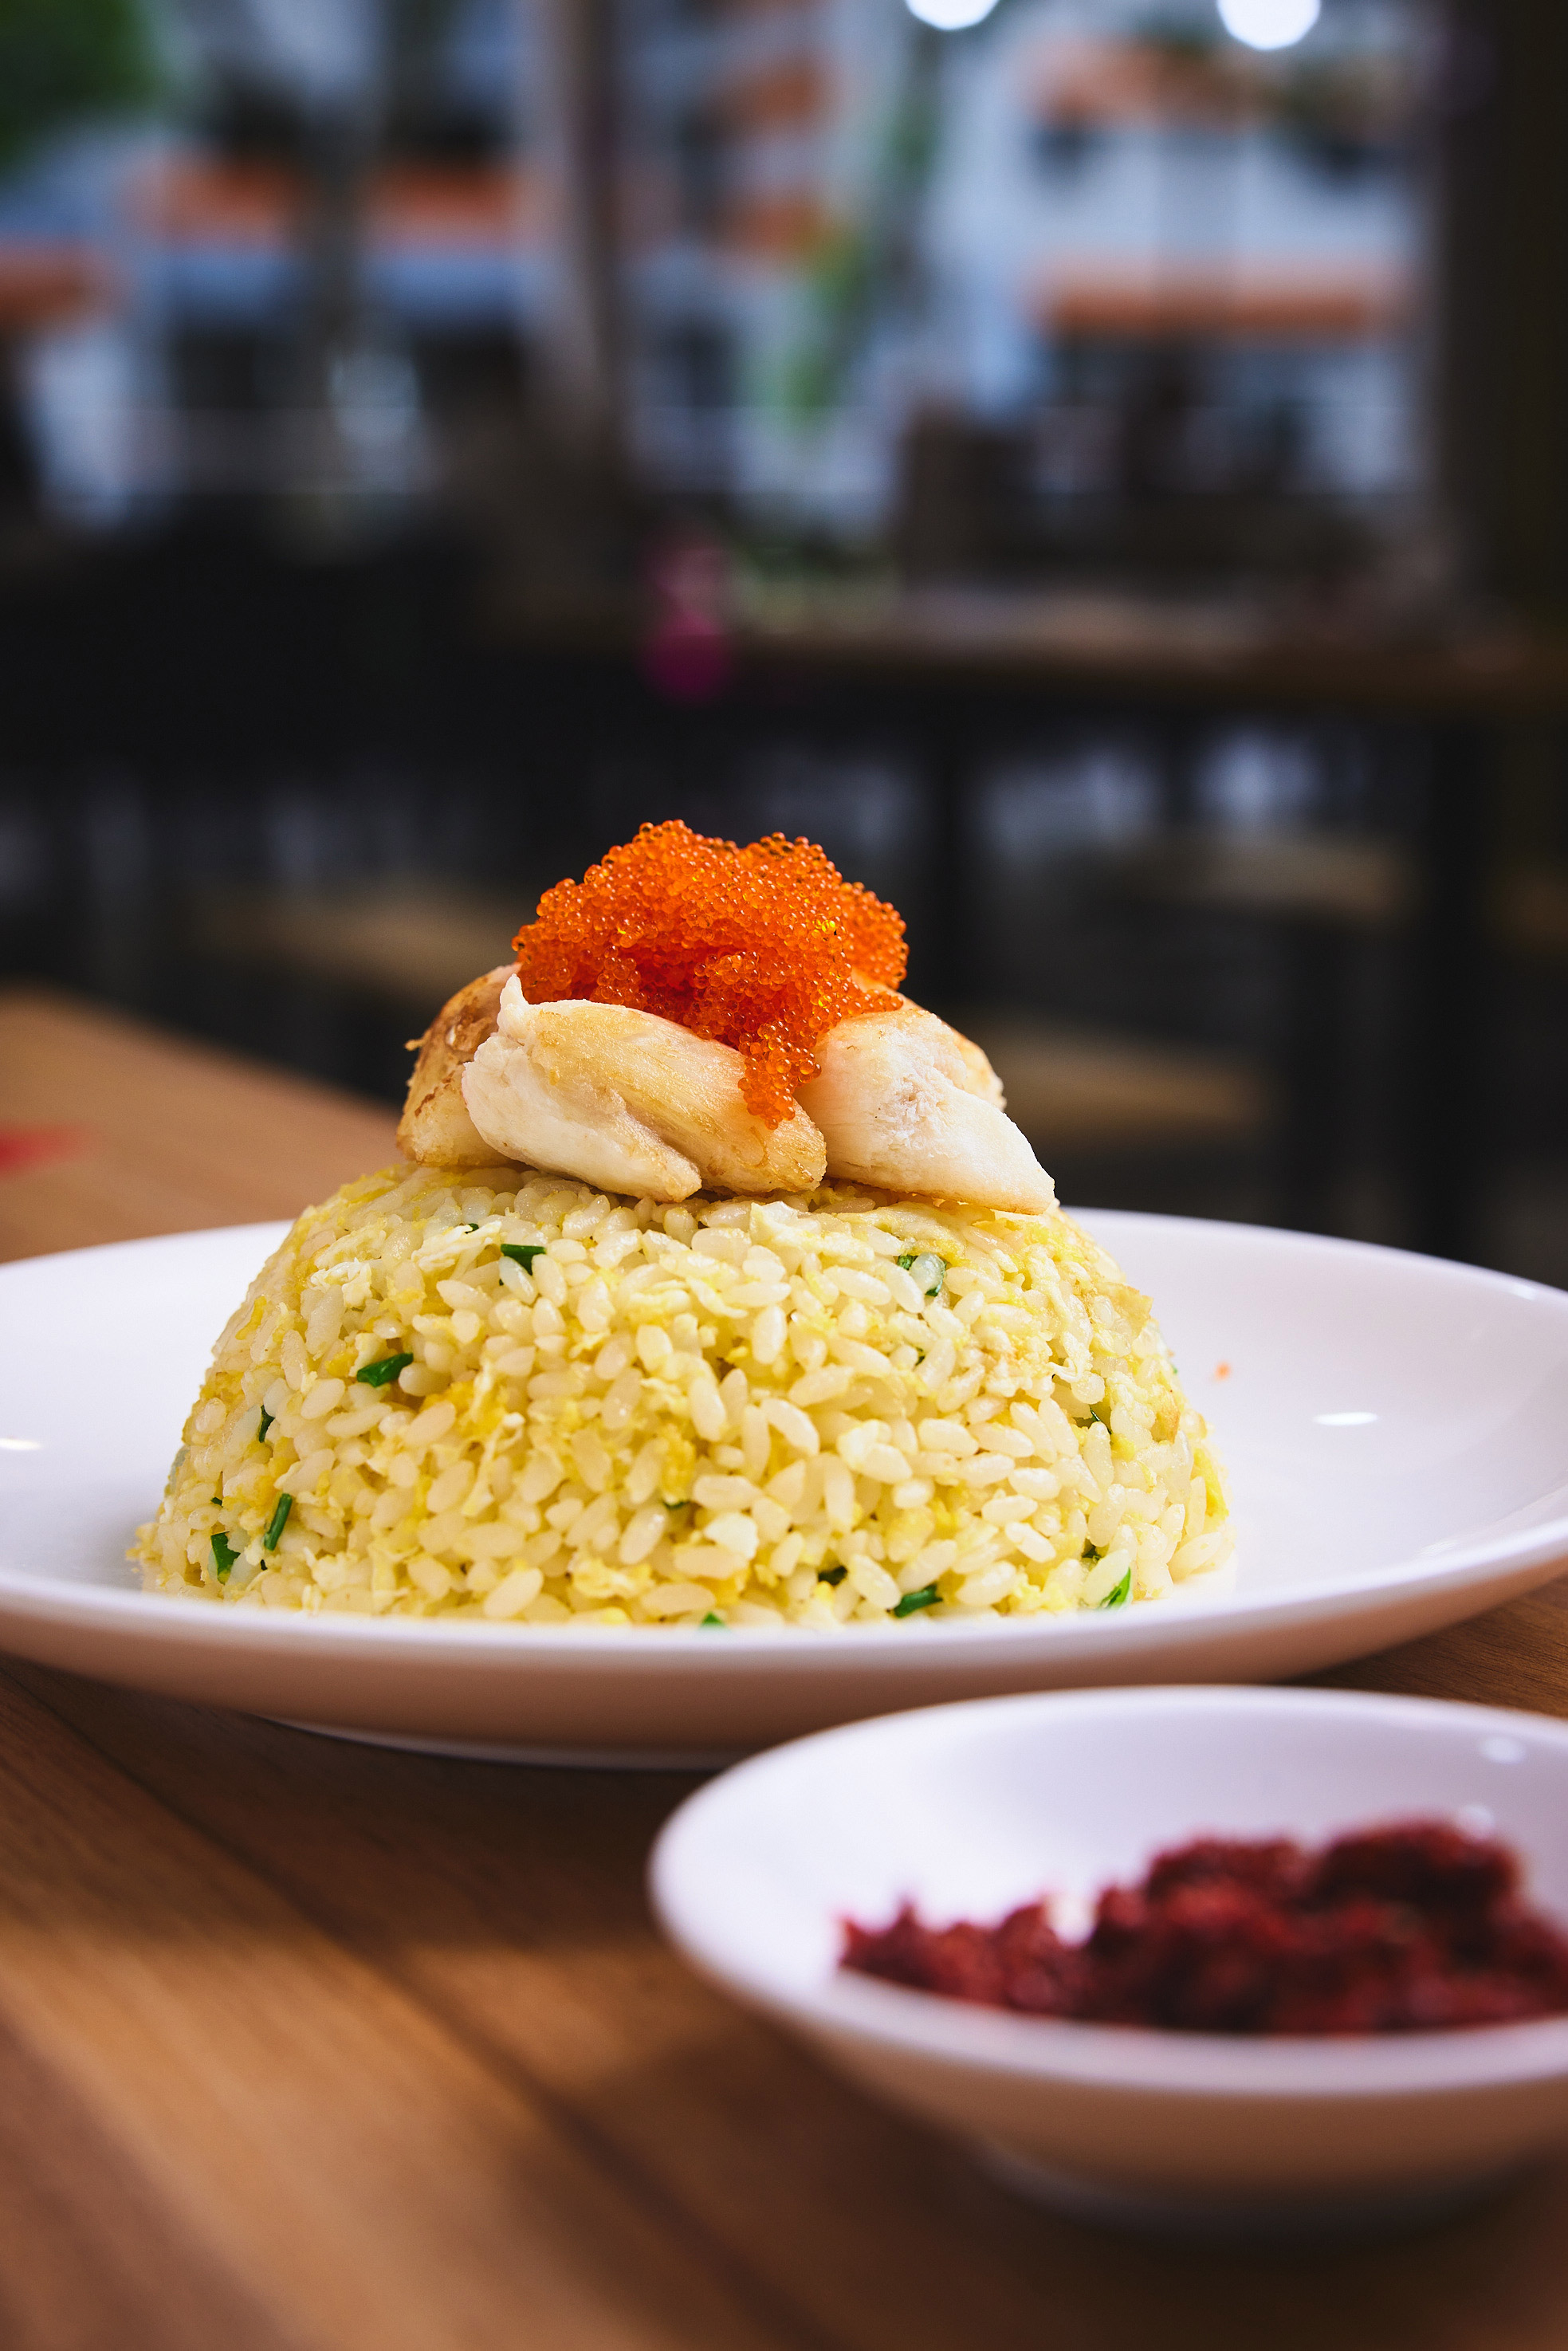 Truffle Egg Fried Rice with Jumbo Crab Meat, $10.90